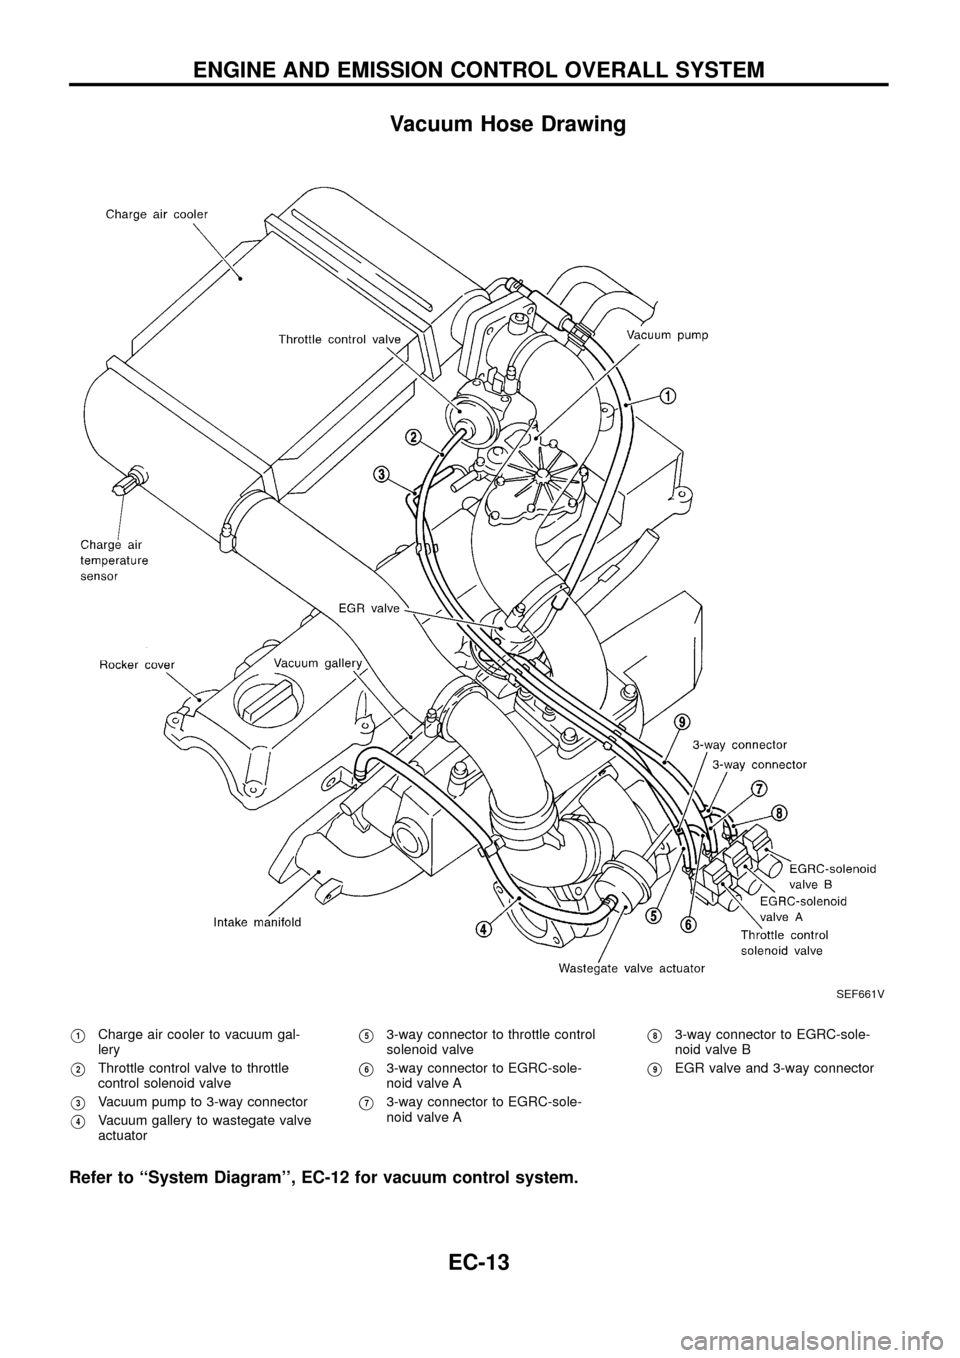 NISSAN PATROL 1998 Y61 / 5.G Engine Control Workshop Manual Vacuum Hose Drawing
V1Charge air cooler to vacuum gal-
lery
V2Throttle control valve to throttle
control solenoid valve
V3Vacuum pump to 3-way connector
V4Vacuum gallery to wastegate valve
actuator
V5